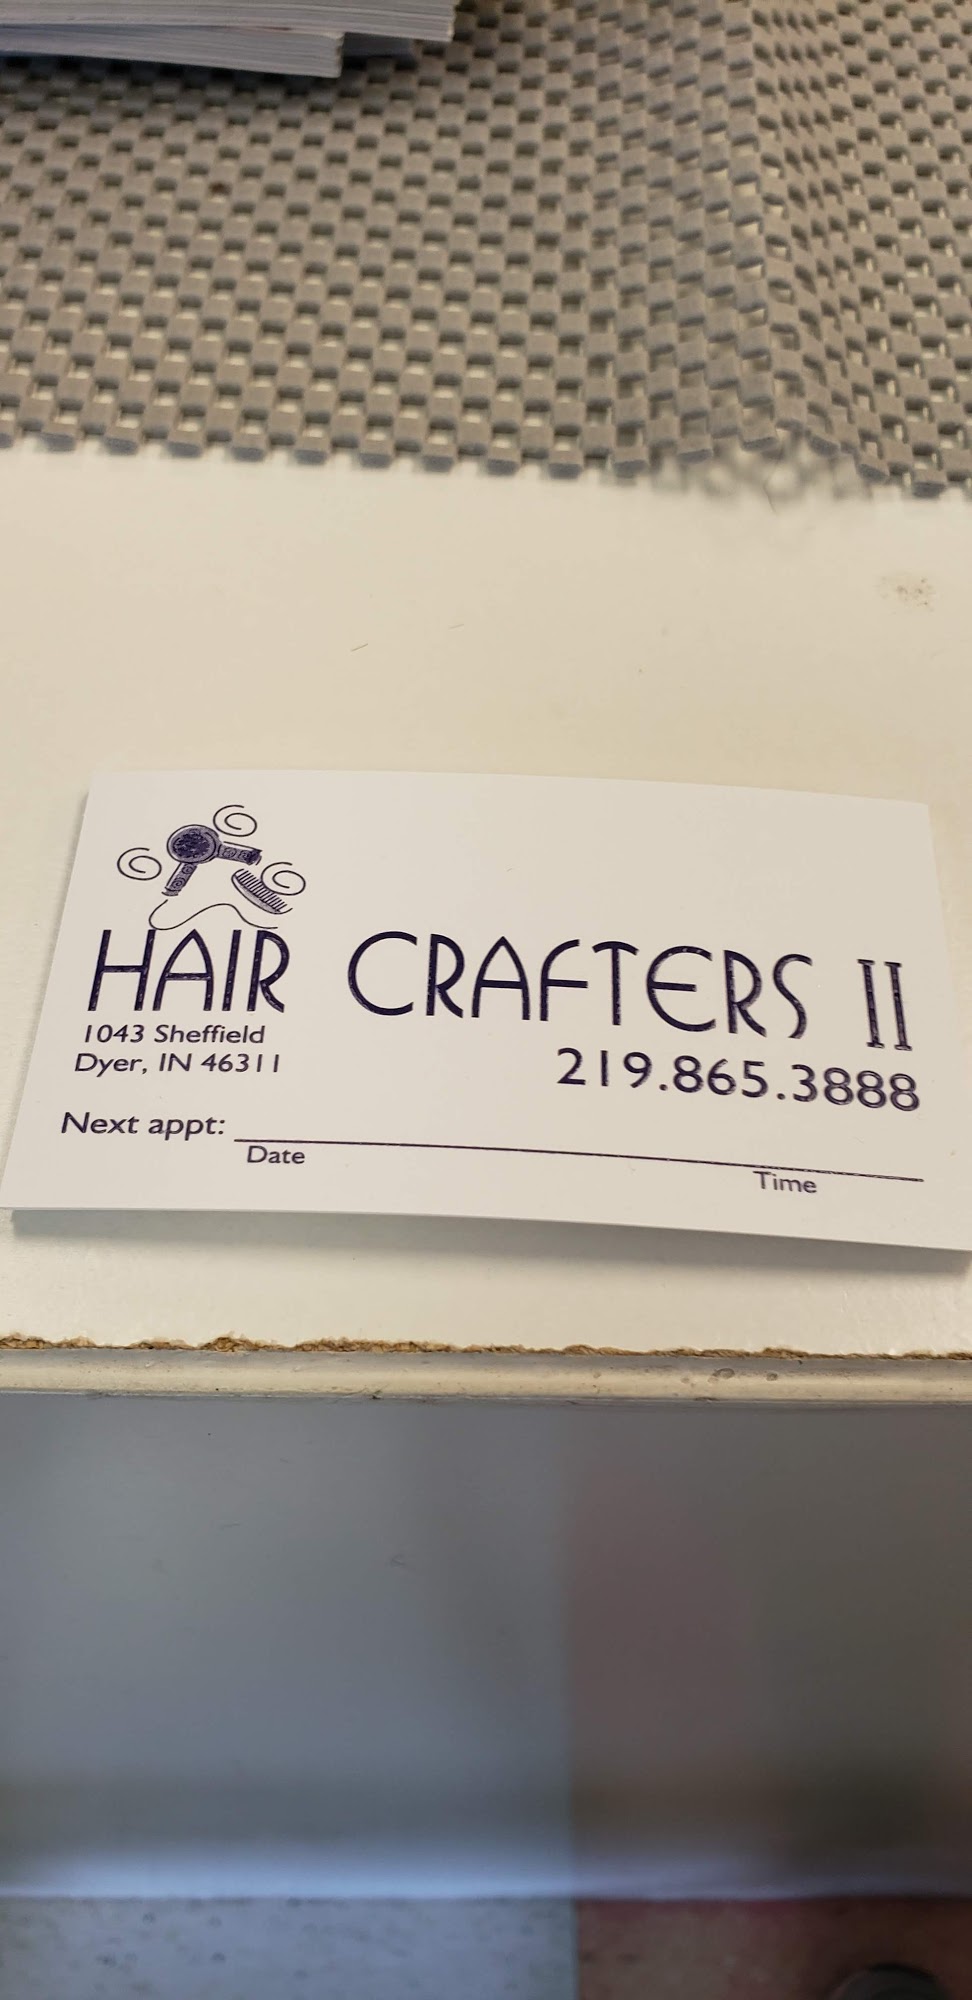 Hair Crafters II